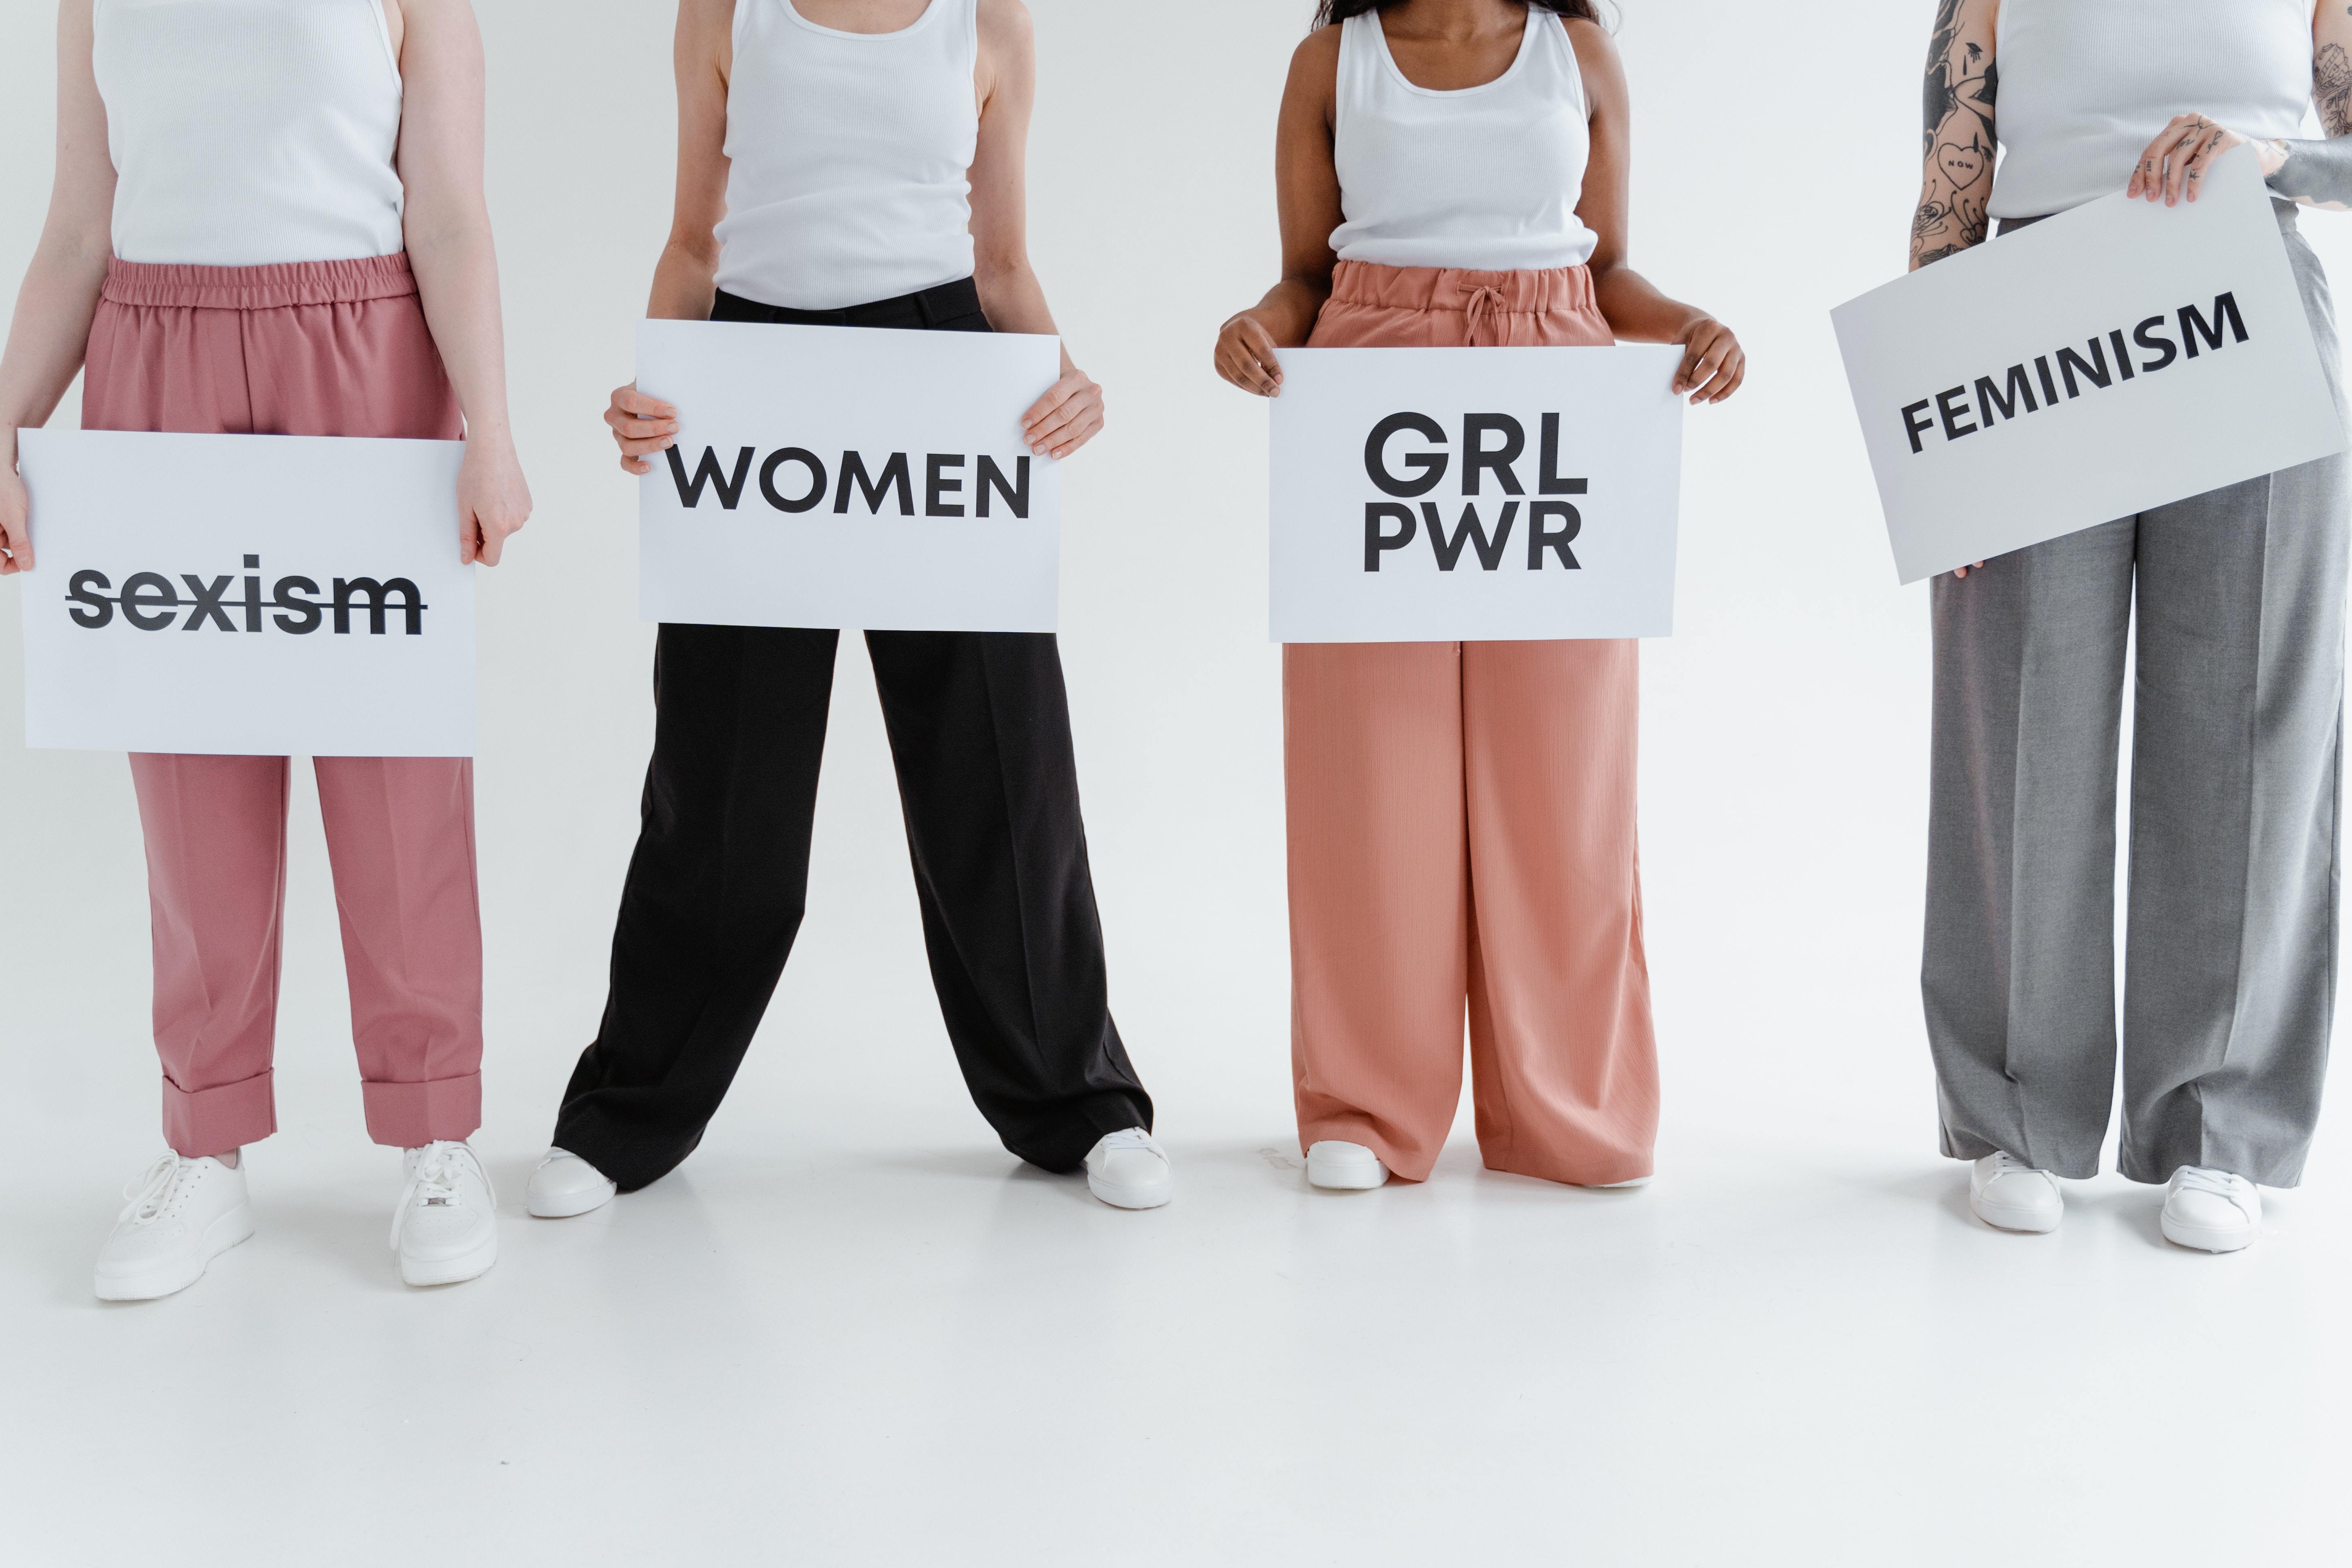 4 Women with feminism signs